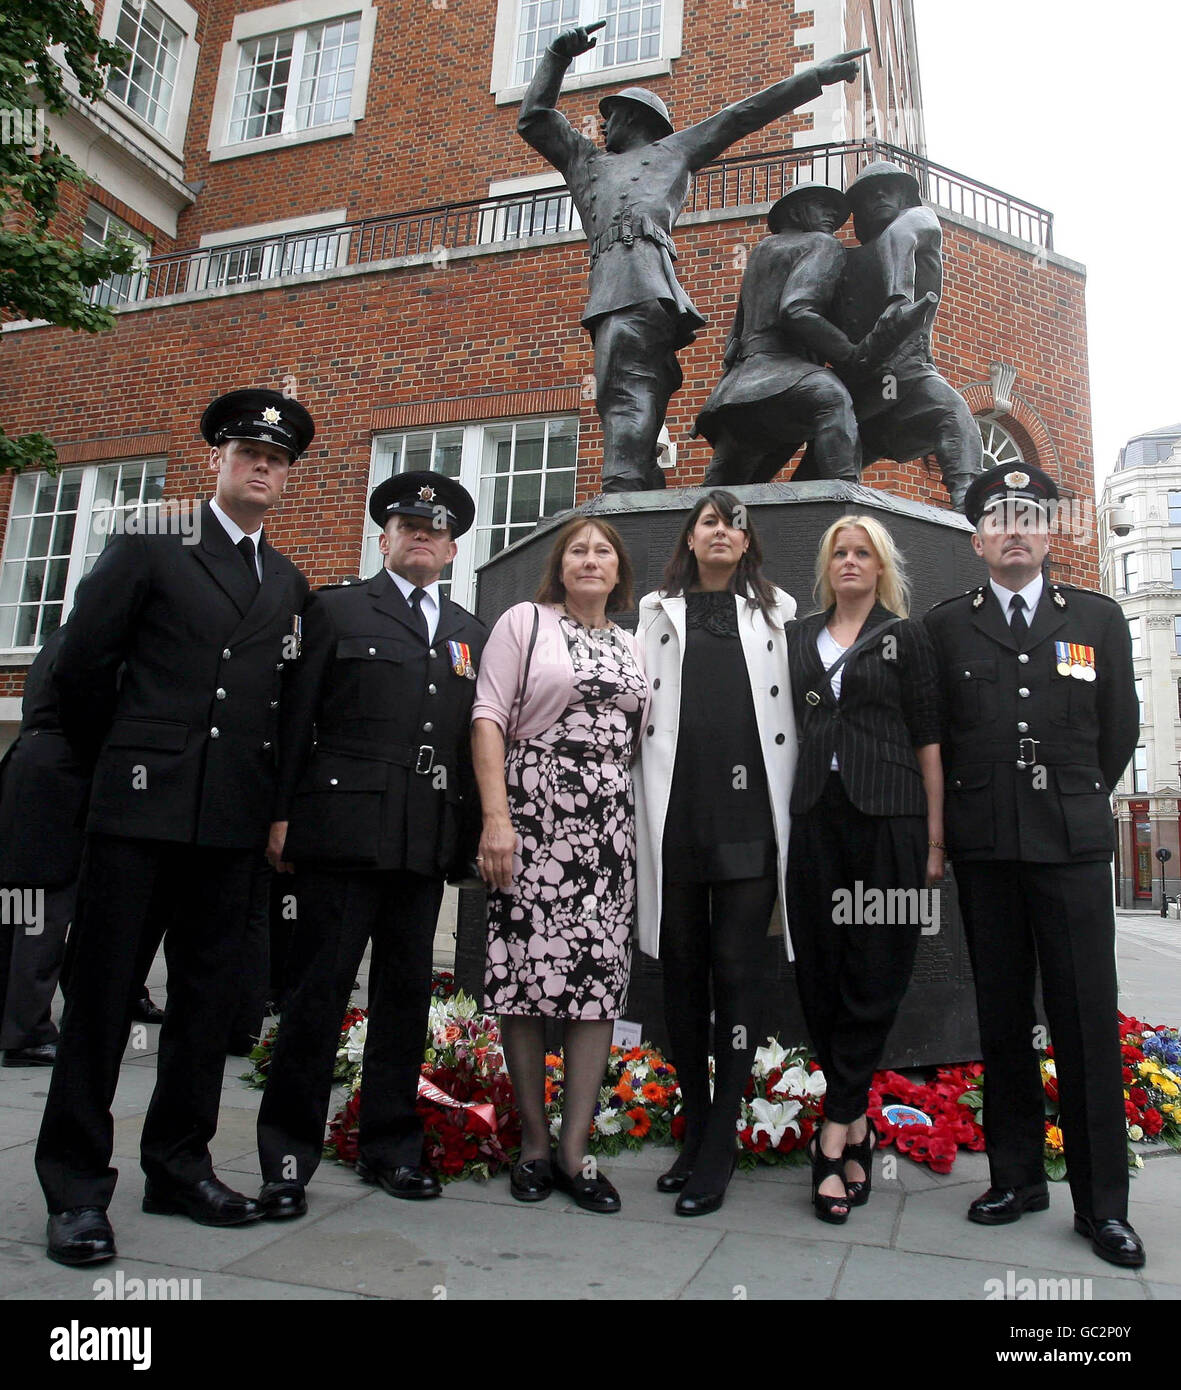 (Left to right) Firefighter Scott Westworth, Watch Manager Tim Foley, Linda Williamson, Lynsey Baird, Rebecca Williamson and Chief Fire Officer Brian Allaway of Lothian and Borders Fire Rescue Service during the Annual International Firefighters Service of Remembrance in London. Stock Photo